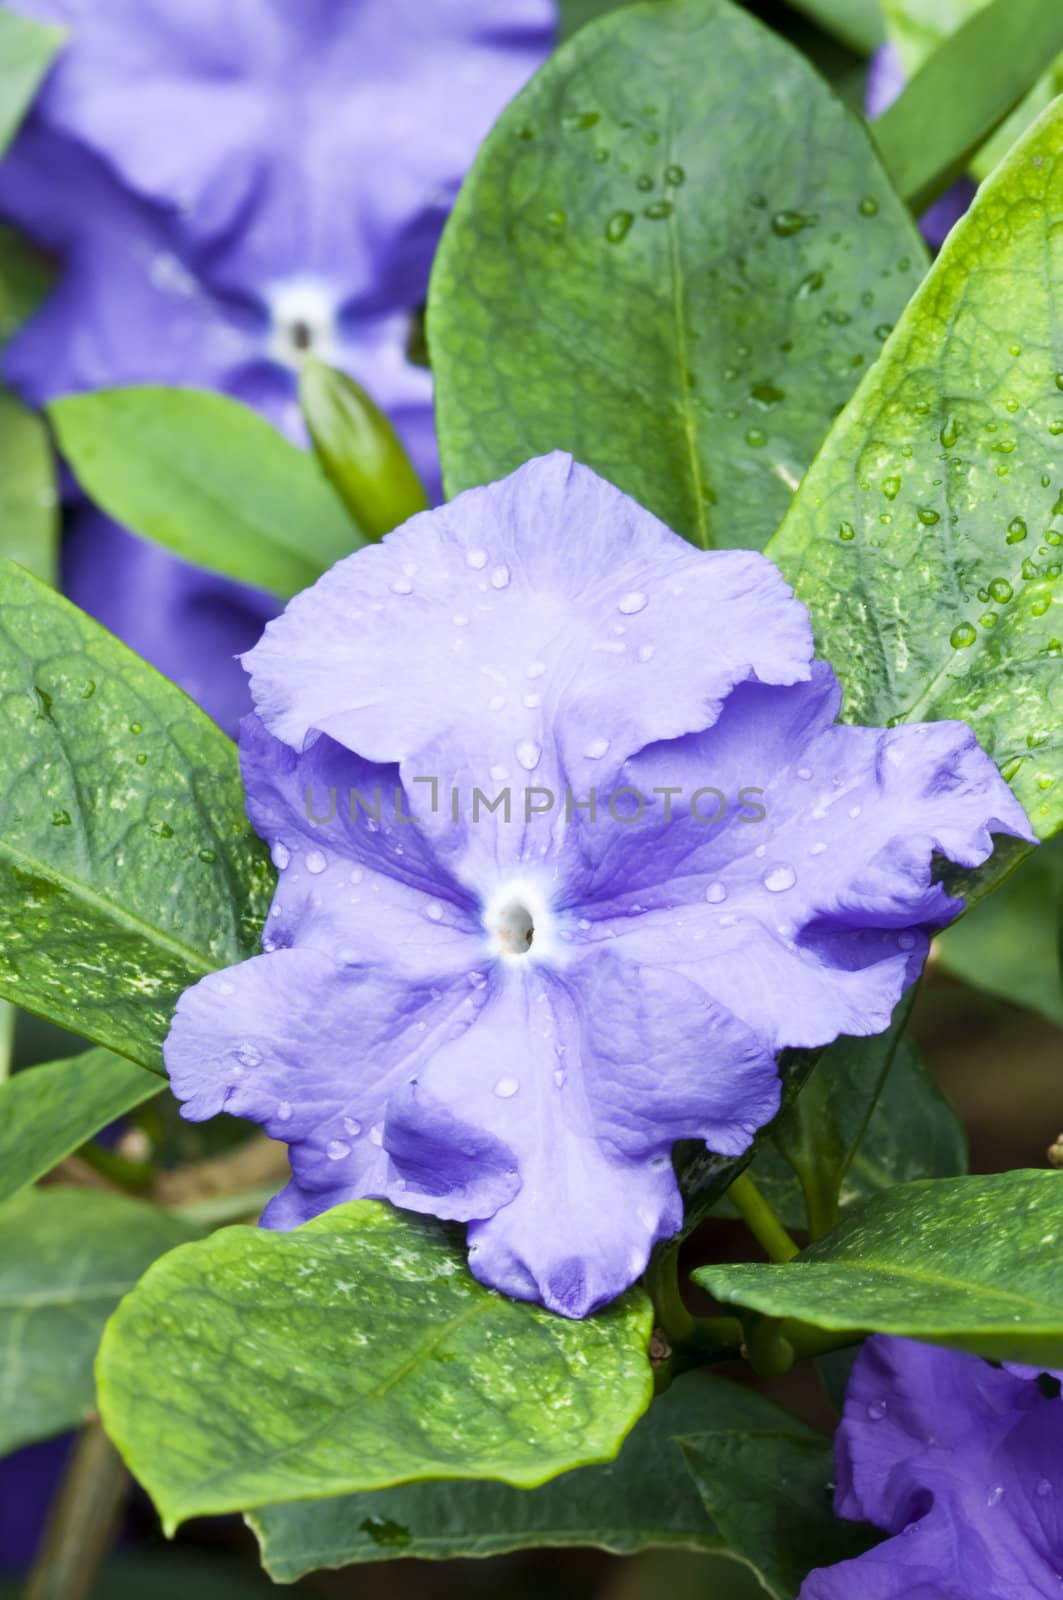 Tropical Blue flowers among green leaves